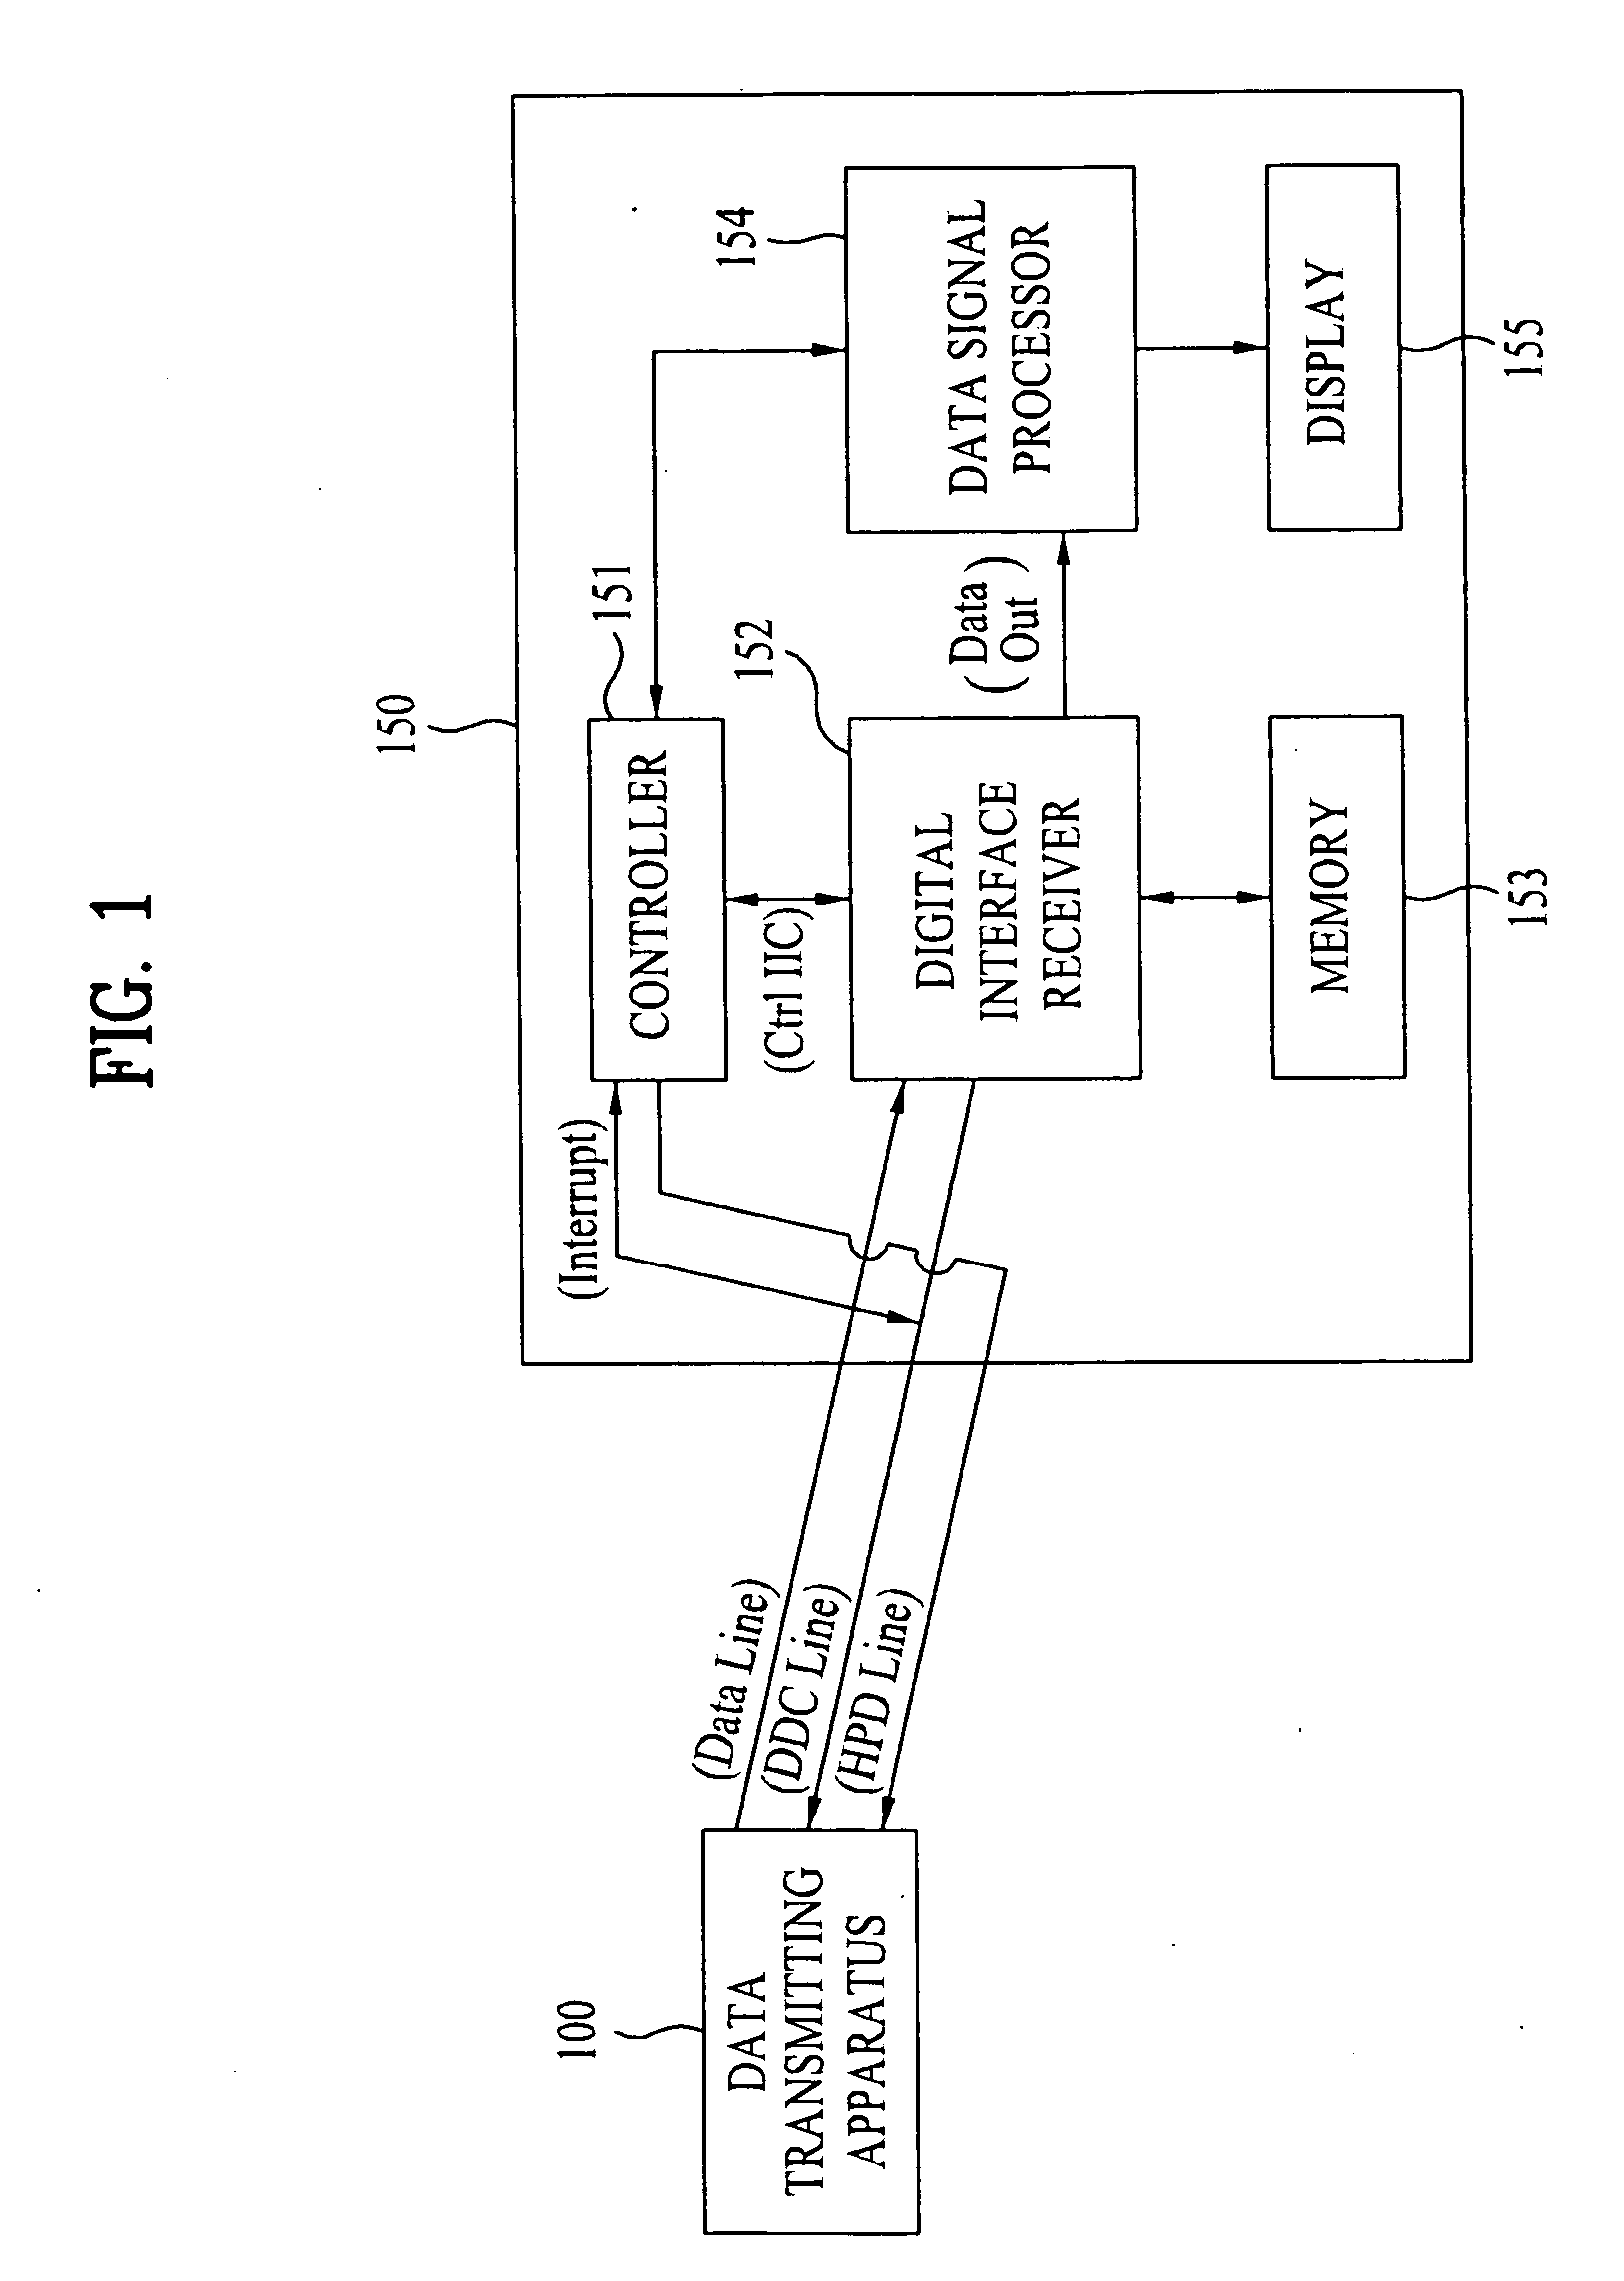 Data receiving apparatus having digital contents copy protection function and method for controlling the same